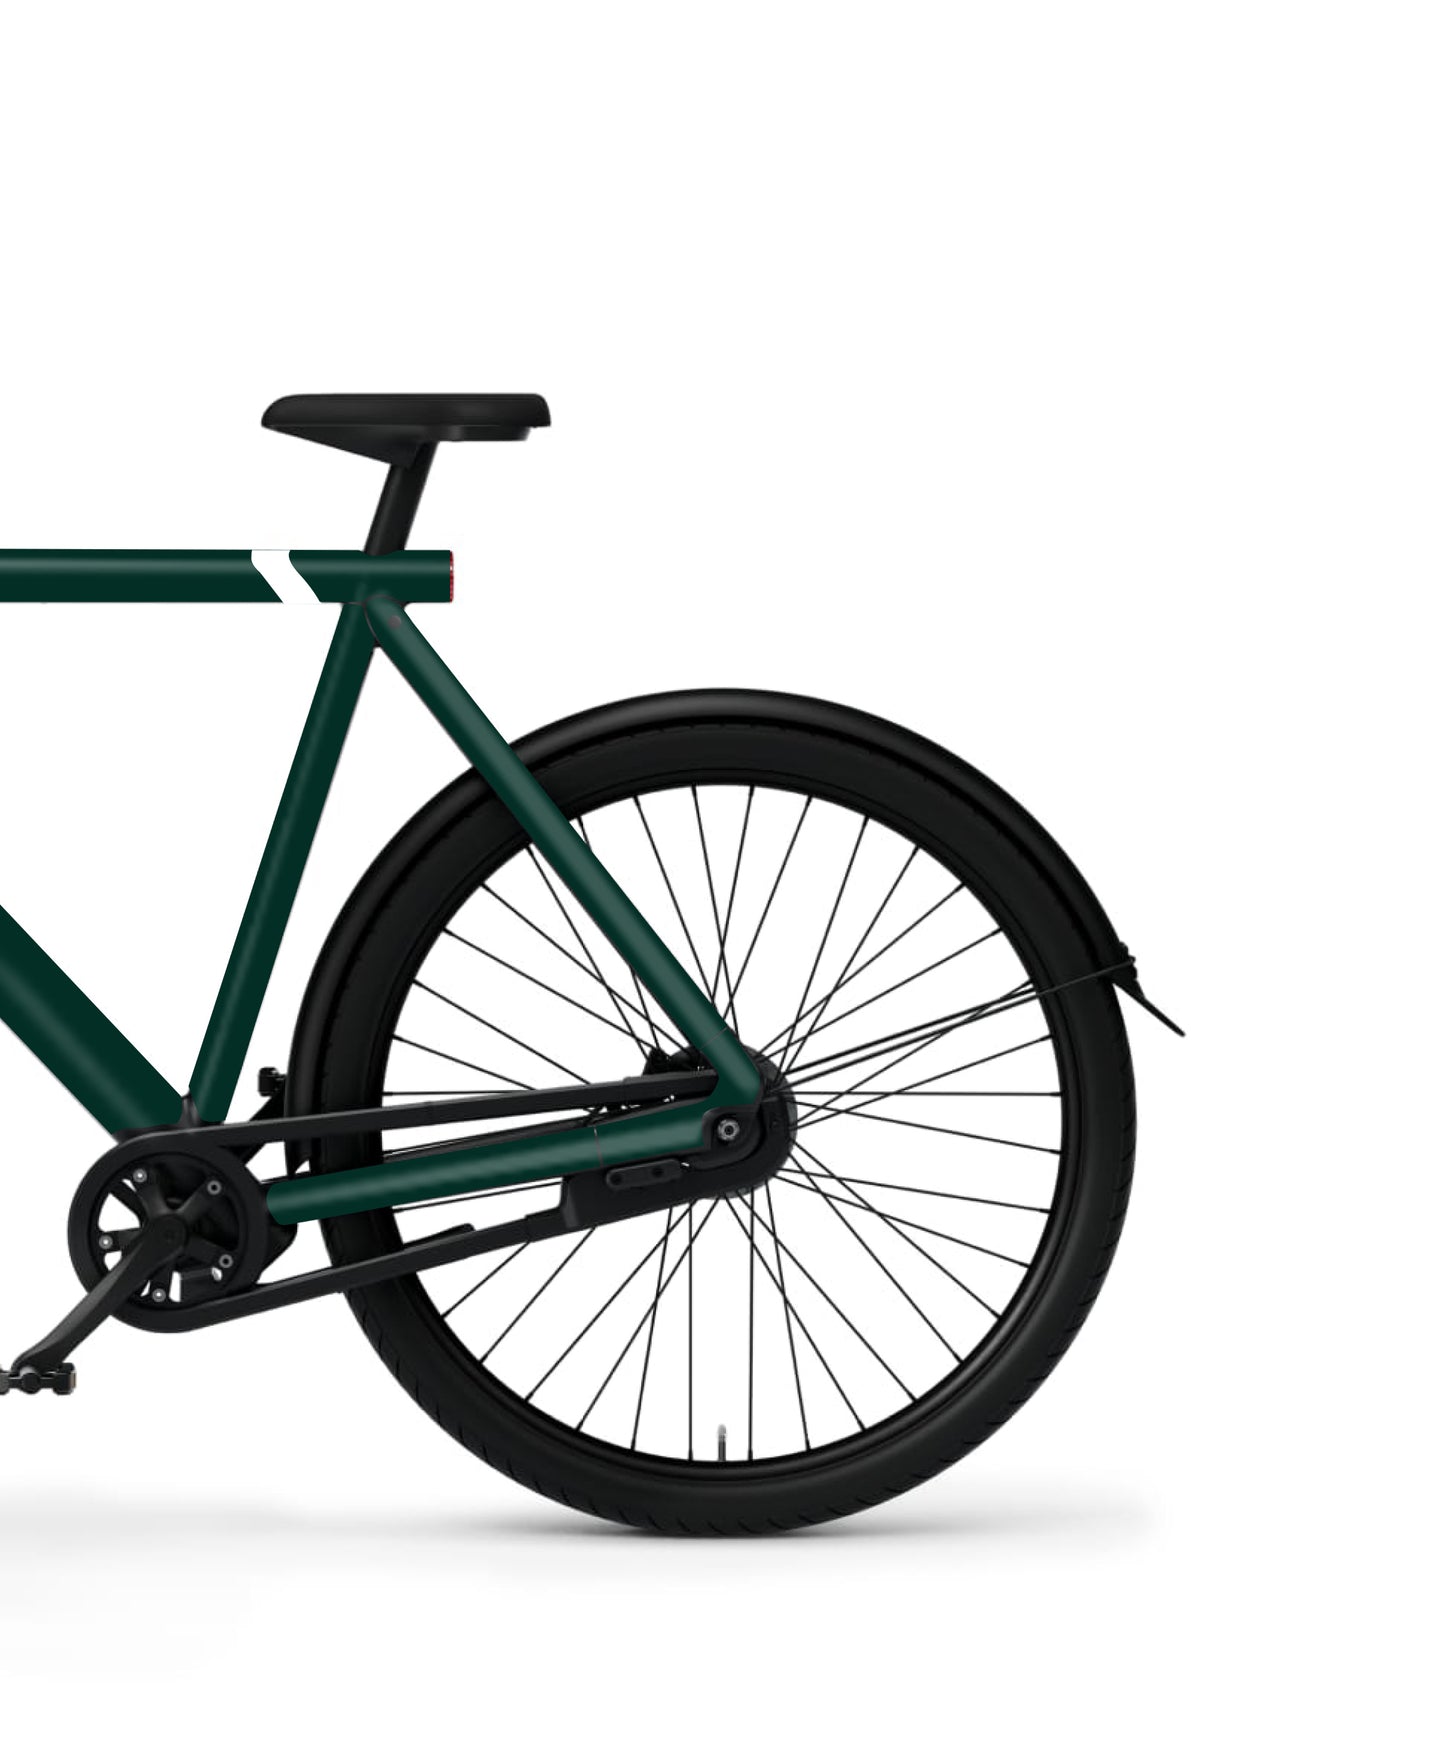 RACING GREEN PROTECT KIT FOR VANMOOF S2/S3